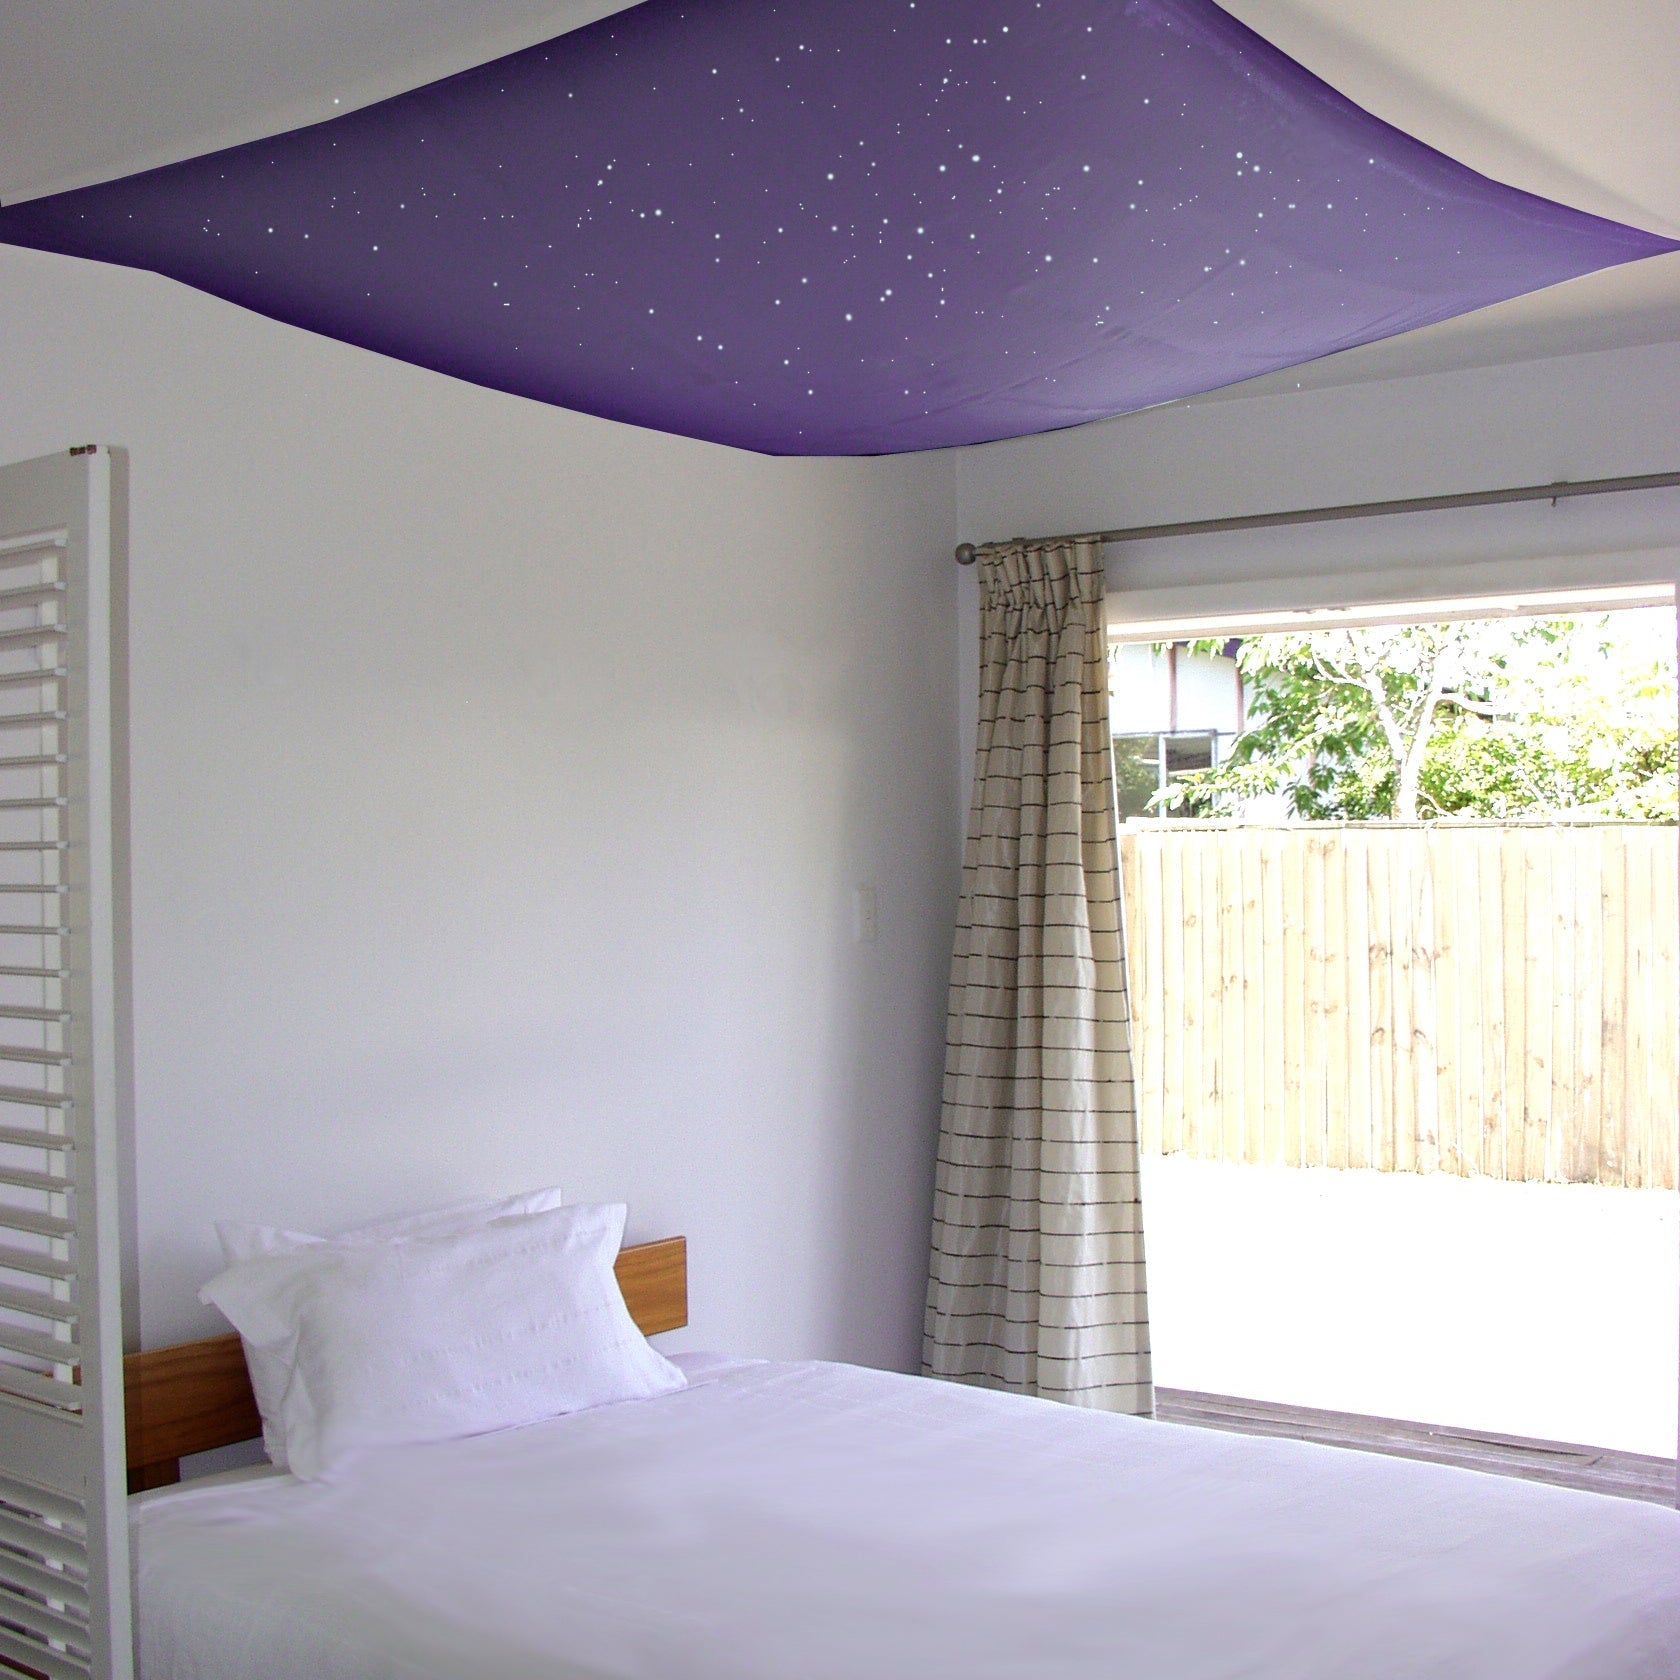 purple glow in the dark star ceiling fabric hanging. Star Canopy for adult master bedroom or a dreamy addition to a kids space themed bedroom